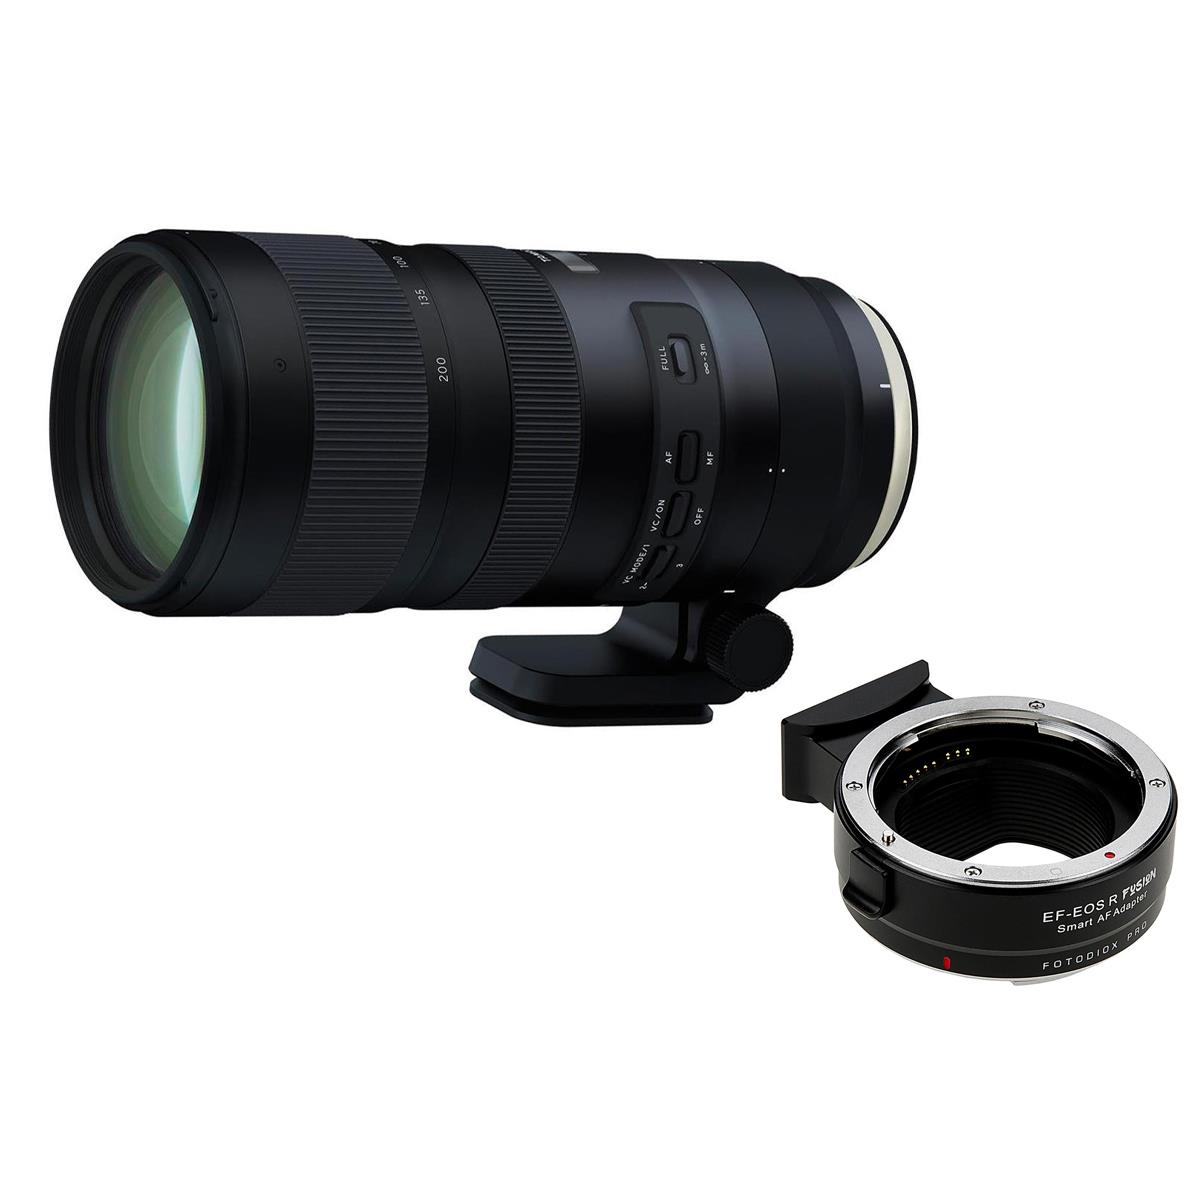 Tamron SP 70-200mm f/2.8 Di VC USD G2 Lens with Canon EOS EF/EF-S to RF Adapter -  AFA025C-700 K